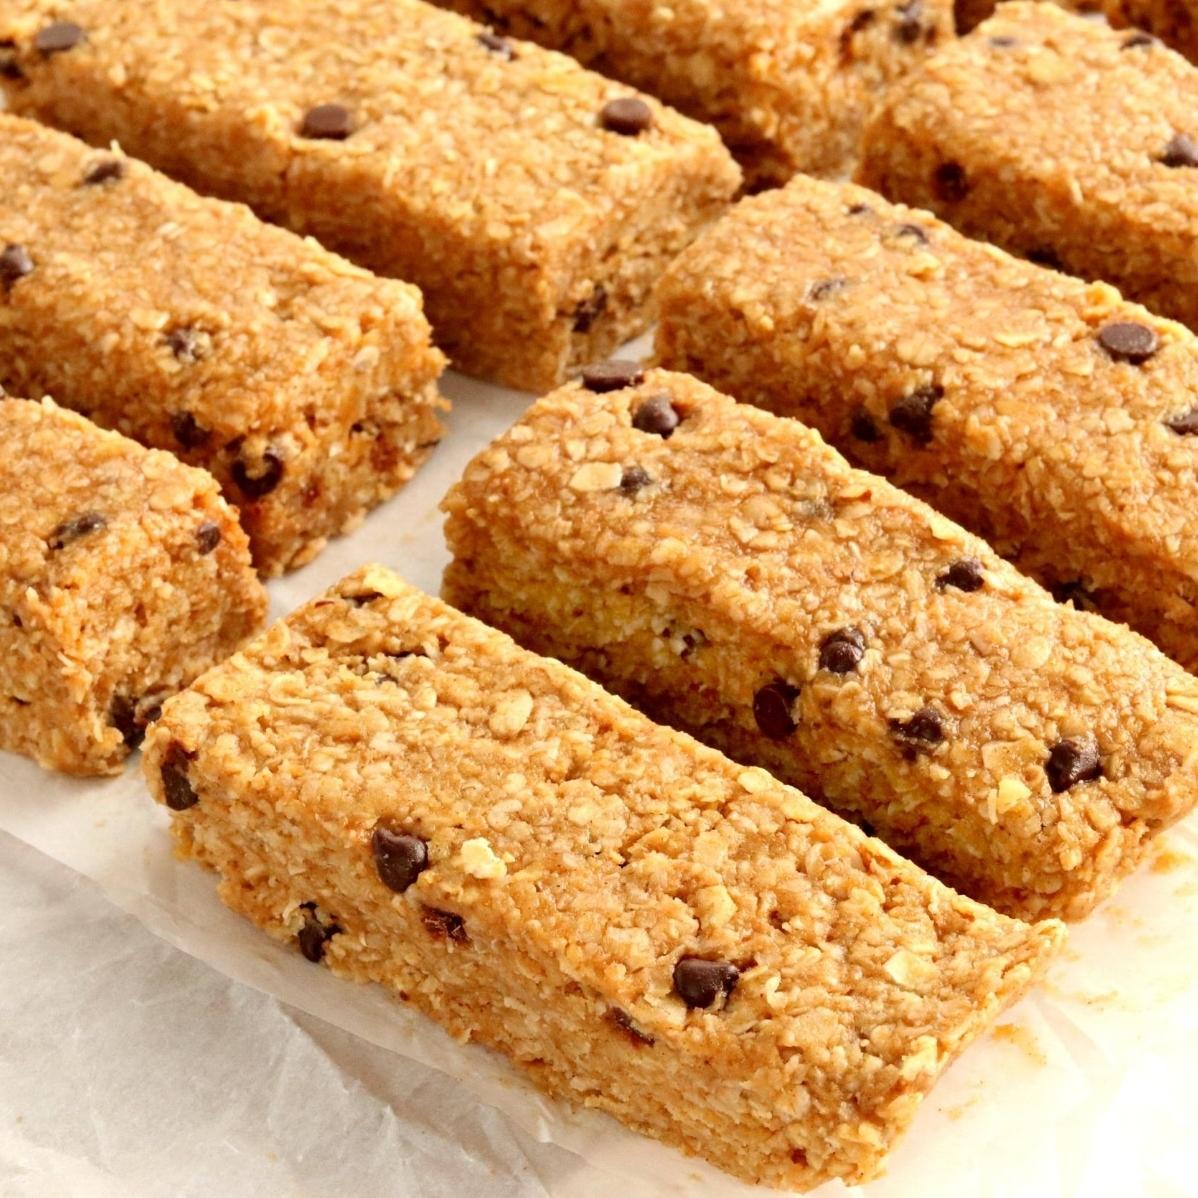  Say goodbye to store-bought granola bars with this easy DIY recipe.